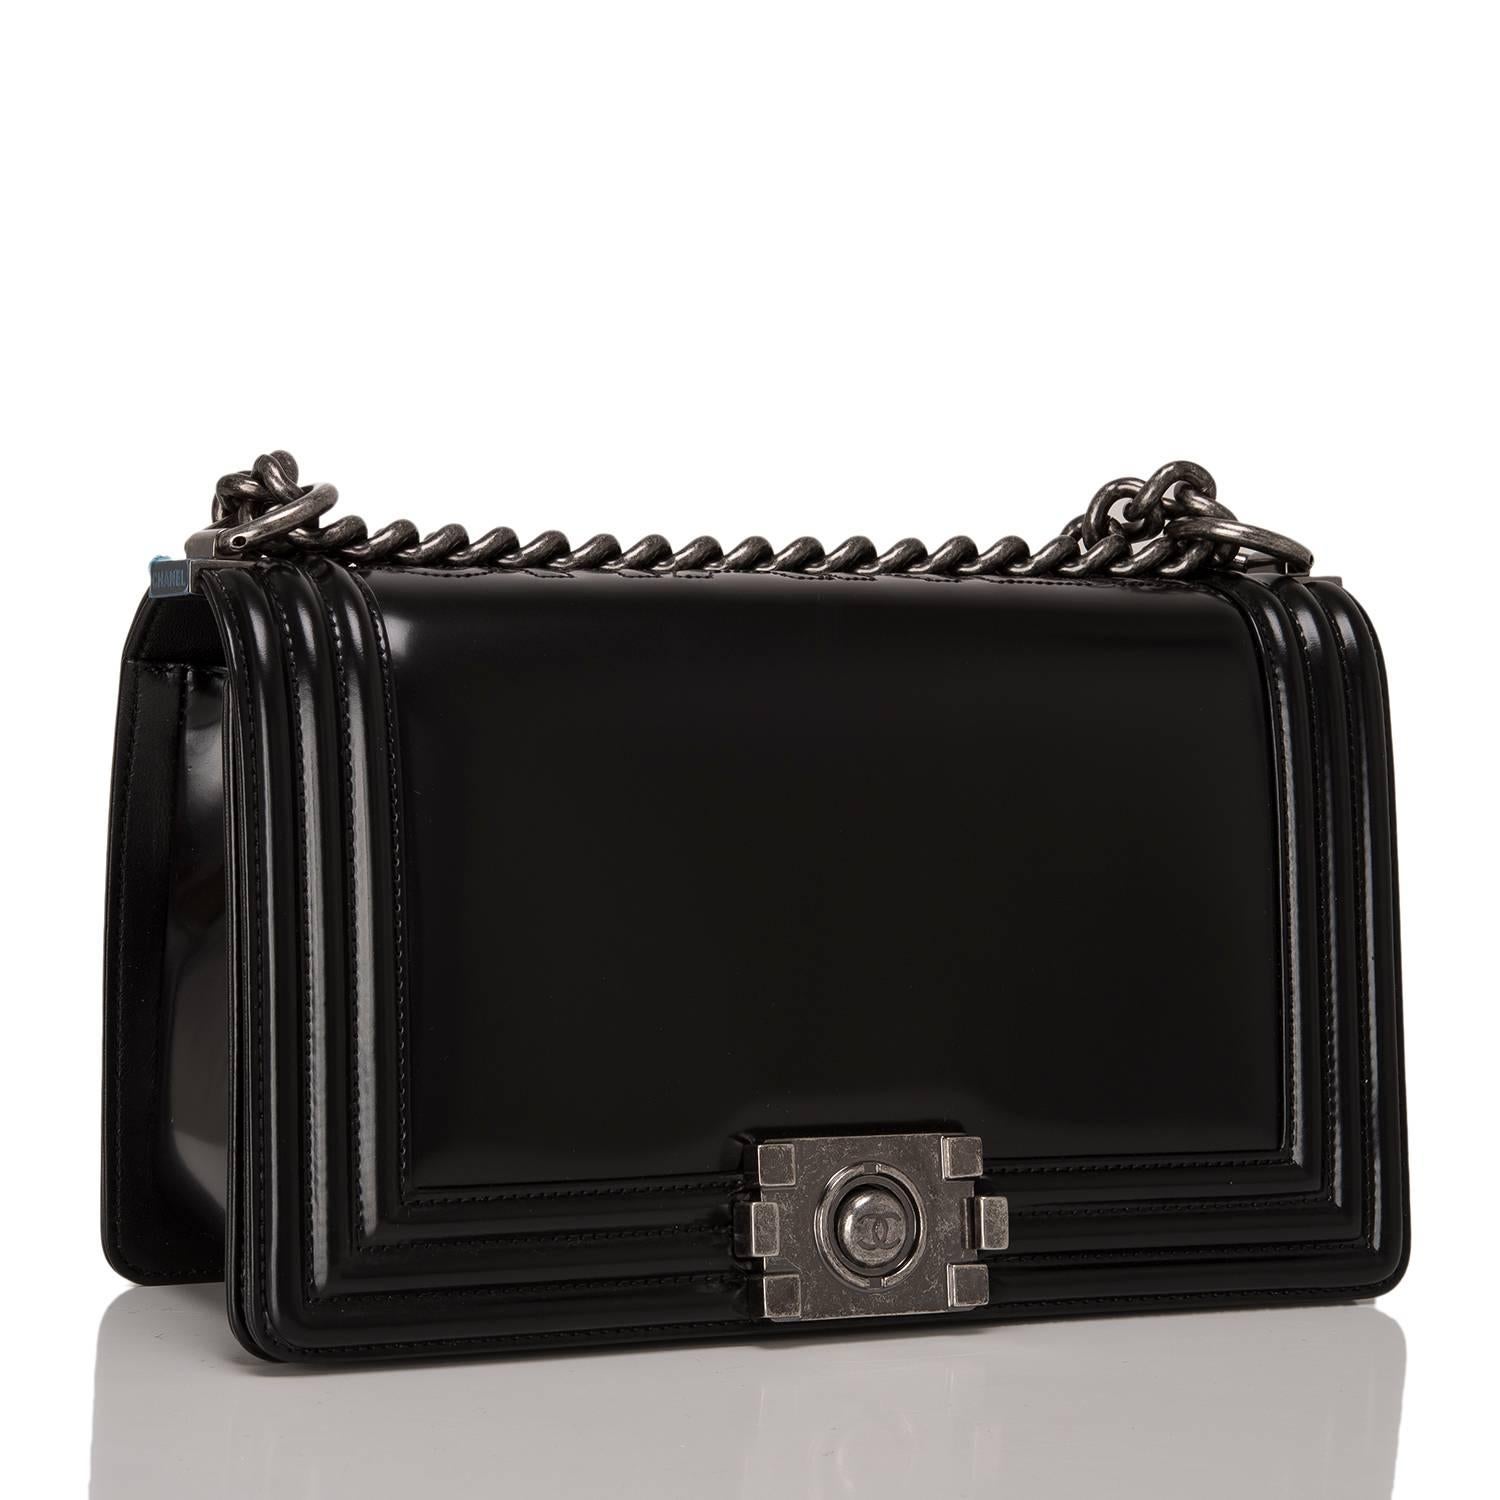 Chanel limited edition, Metiers D'Art Medium Boy bag is made of black smooth calfskin leather accented with aged ruthenium hardware.

The bag features a full front flap with a Le Boy CC logo push lock closure, C-H-A-N-E-L embossed at the spine and